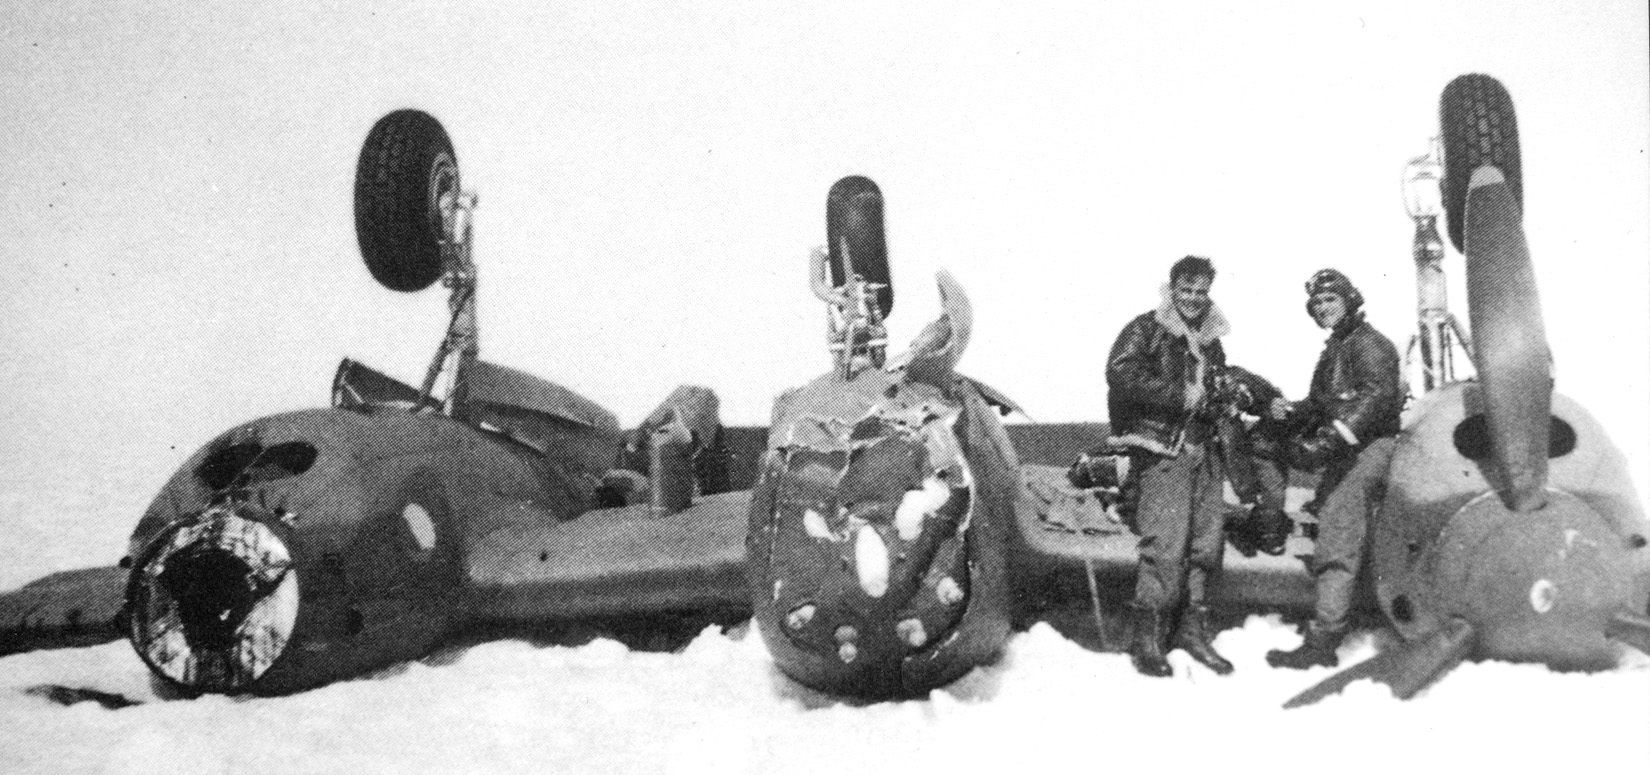 Two airmen stand alongside the P-38 piloted by Brad McManus, which flipped while rolling along the ice during its forced landing on Greenland.